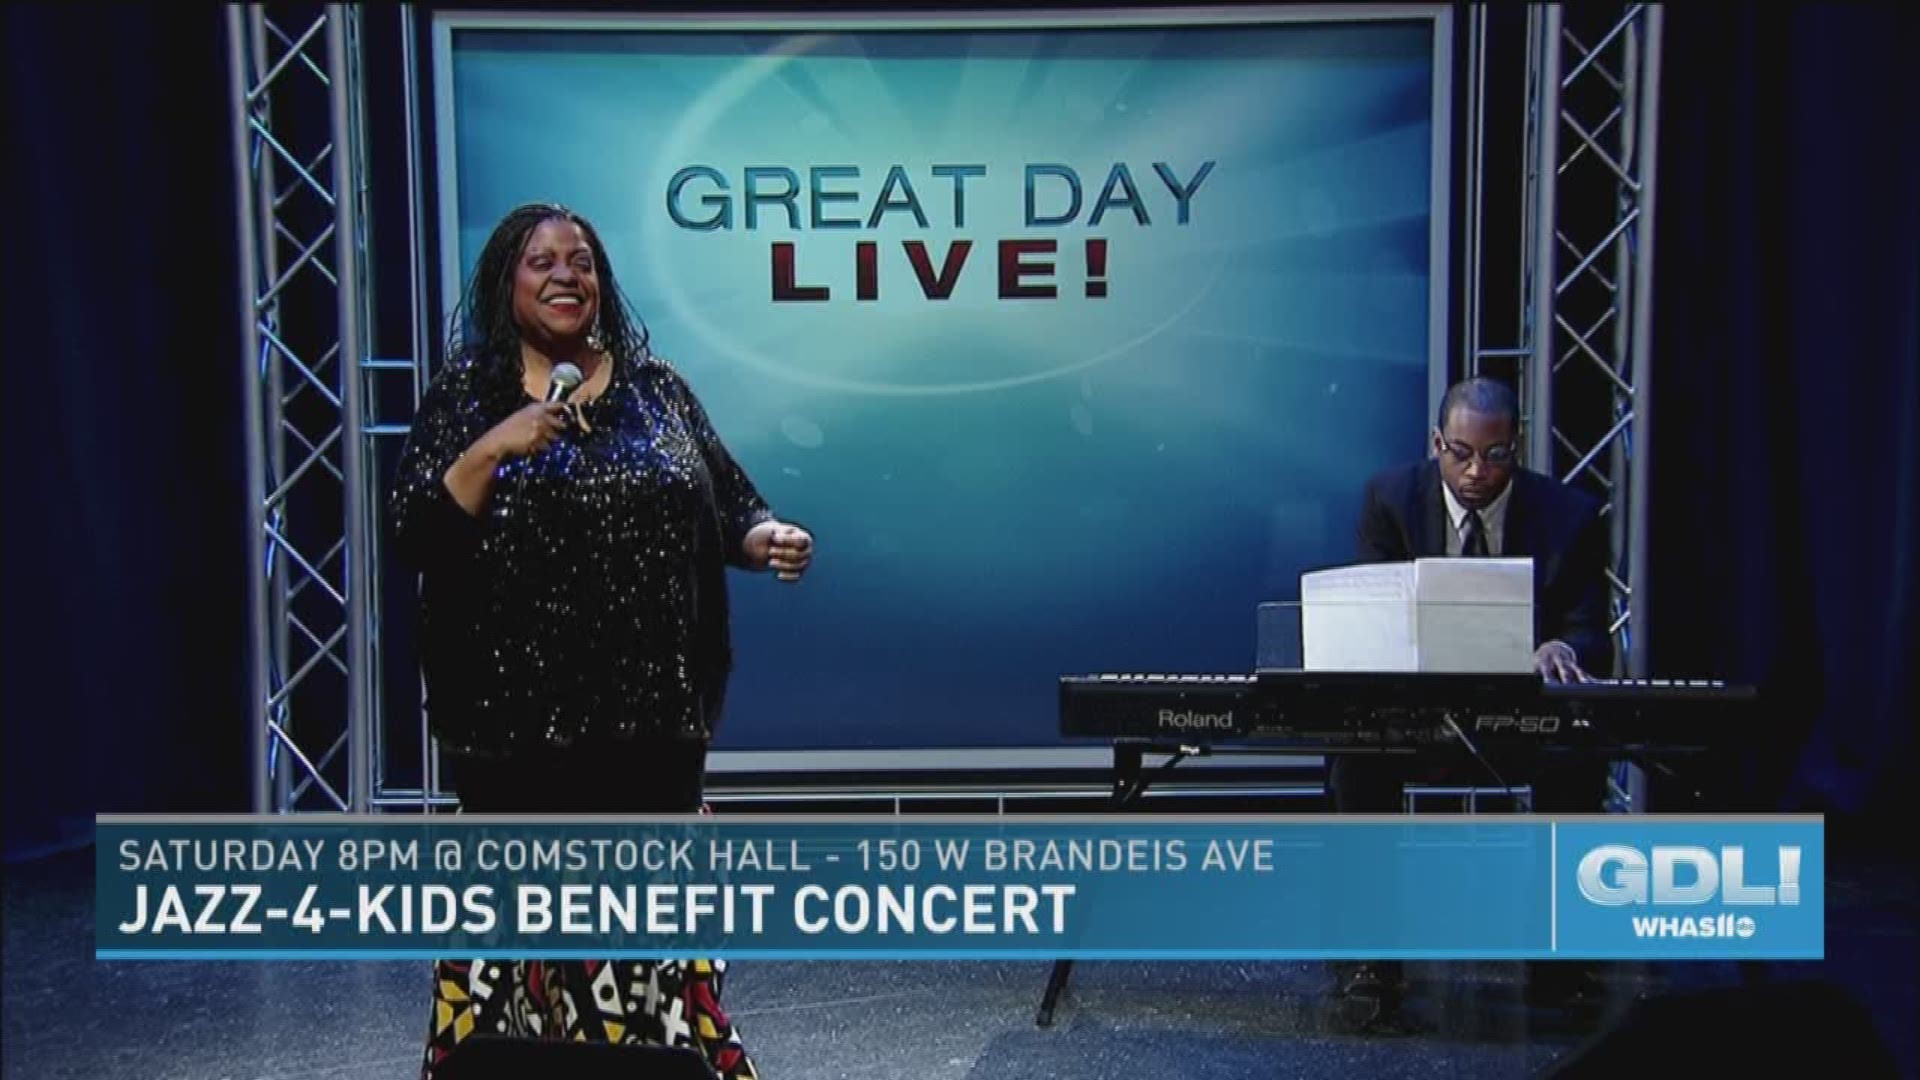 Grammy-Award winning jazz vocalist Carmen Bradford has performed and recorded with legends like Frank Sinatra, Tony Bennett, James Brown and countless others. The  Jazz for Kids benefit concert featuring Carmen Bradford is Saturday, April 6, 2019 starting at 8 PM at UofL's Comstock Hall off West Brandeis Avenue.